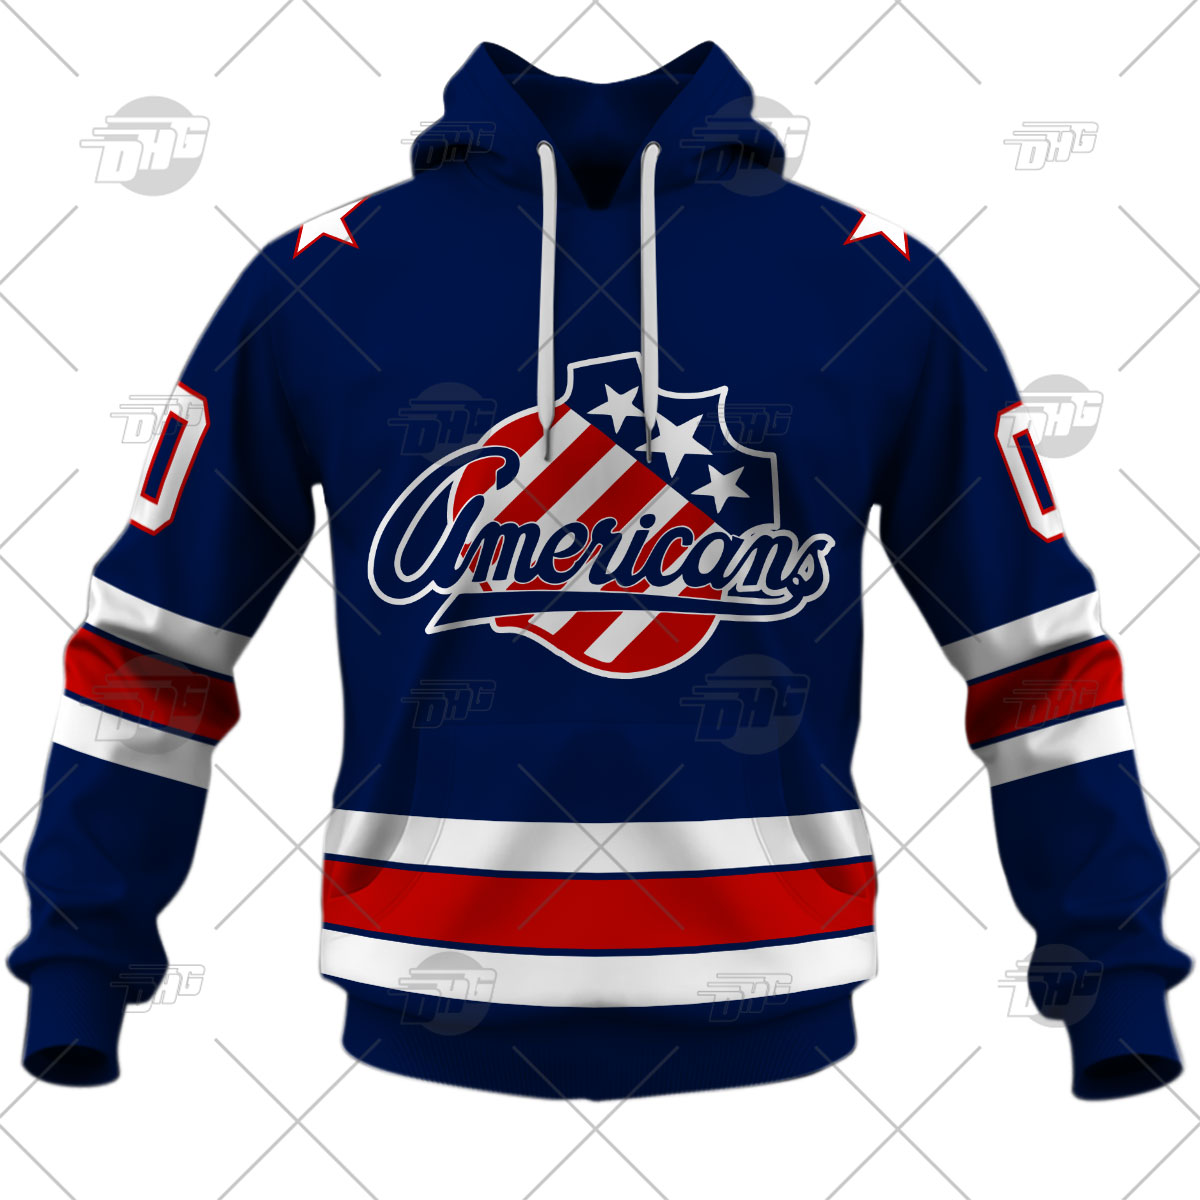 Personalized AHL Rochester Americans White Jersey 2020 - WanderGears